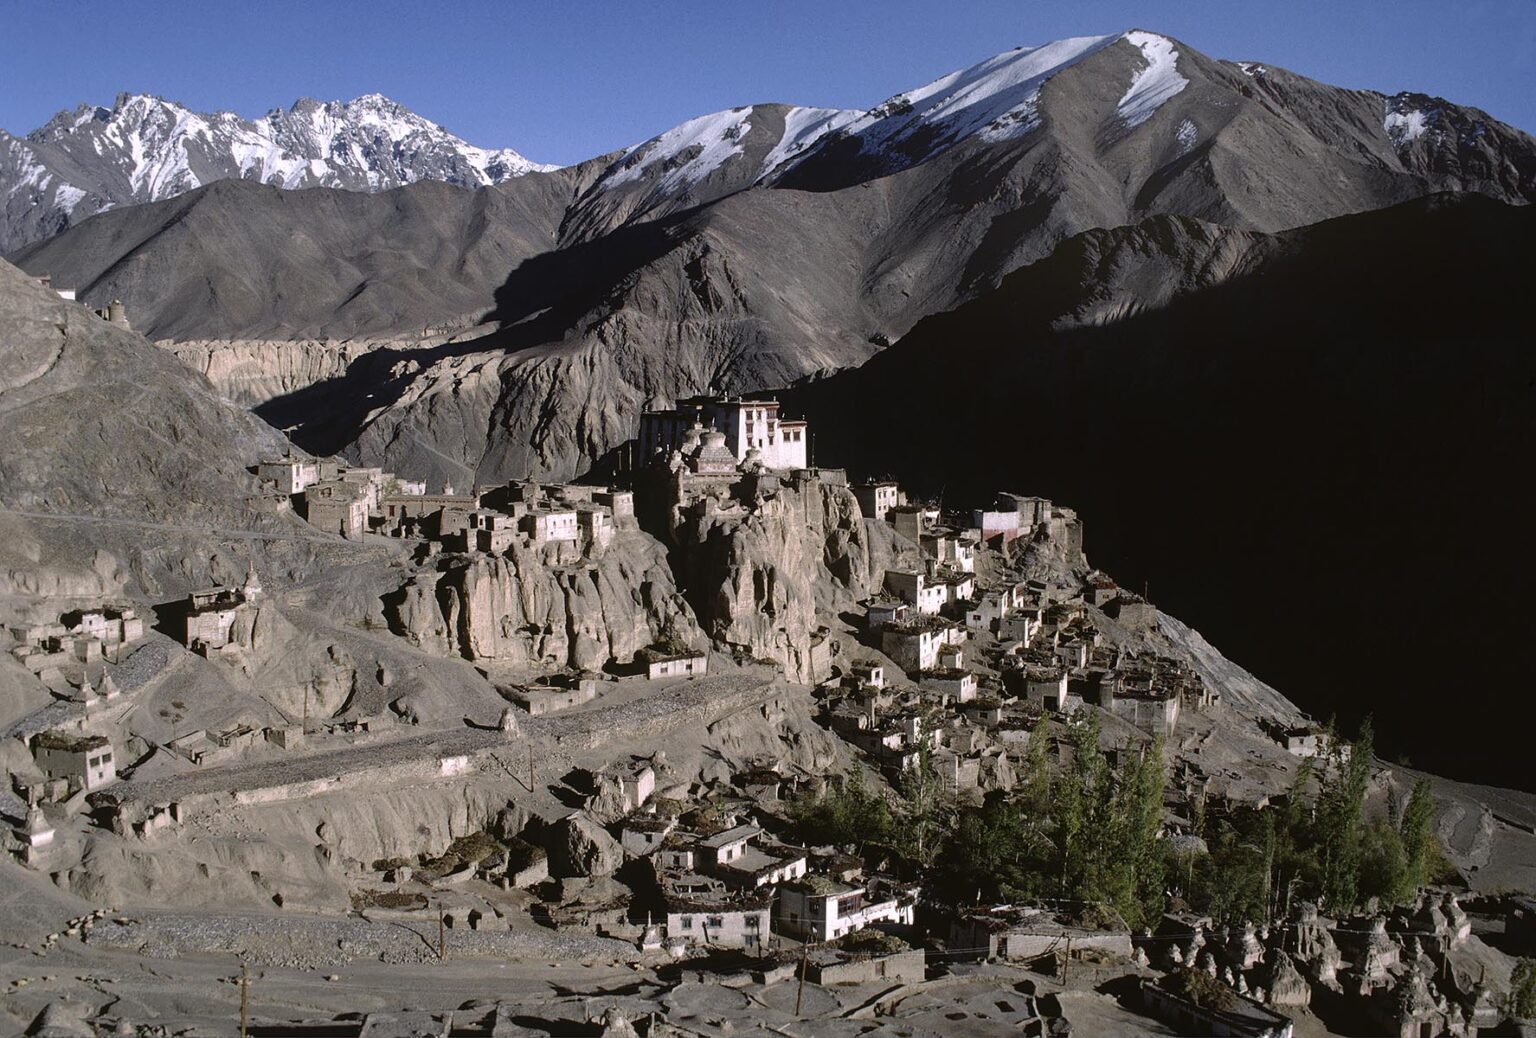 LAMAYURU'S chortens, fallow fields, village, and gompa (monastery), with HIMALAYAN PEAKS in background - LADAKH, INDIA